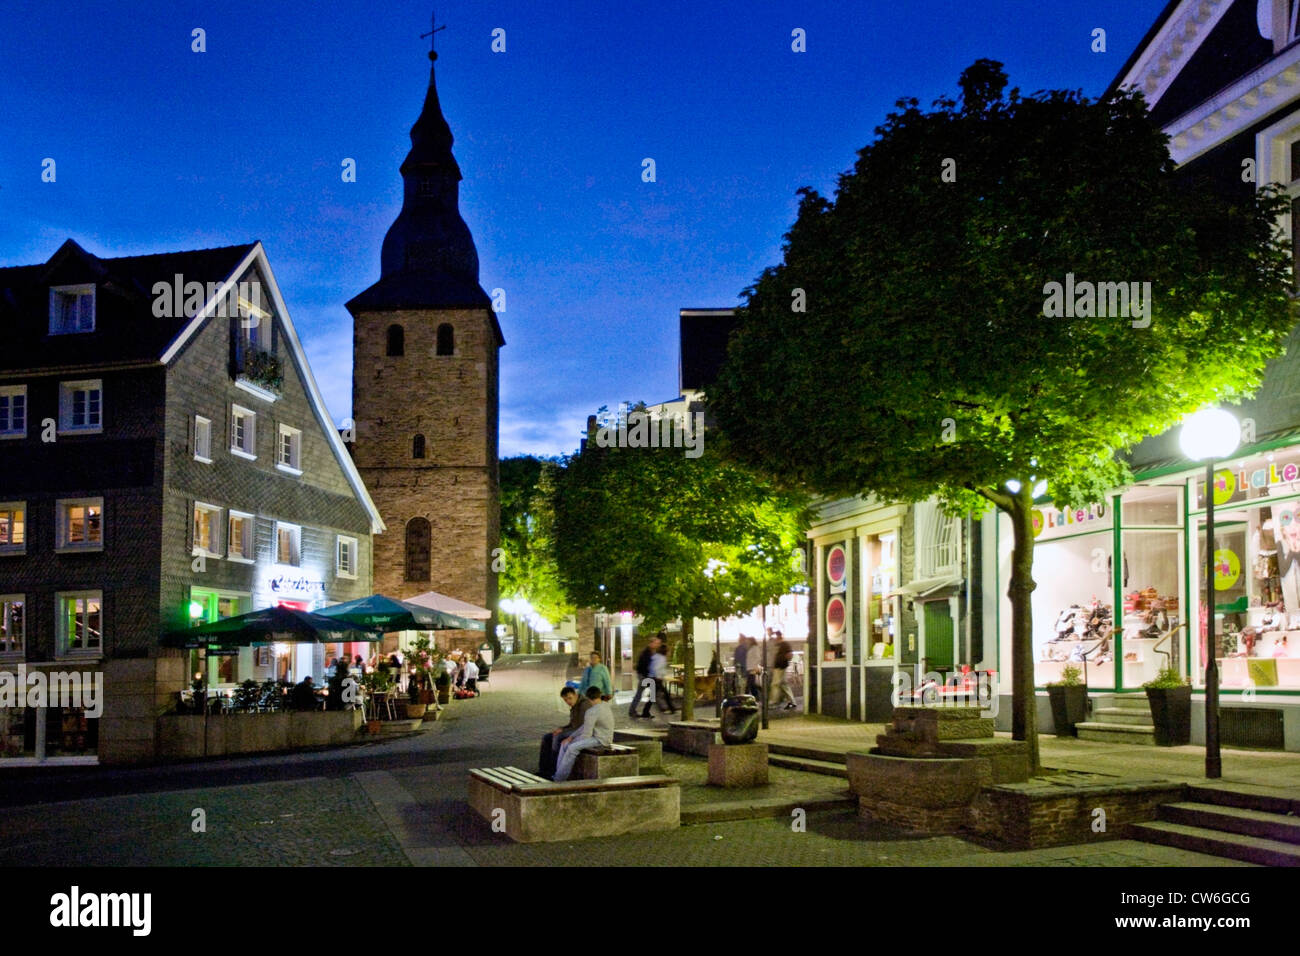 people in the historical old town of Hattingen with its steeple, Germany, North Rhine-Westphalia, Ruhr Area, Hattingen Stock Photo